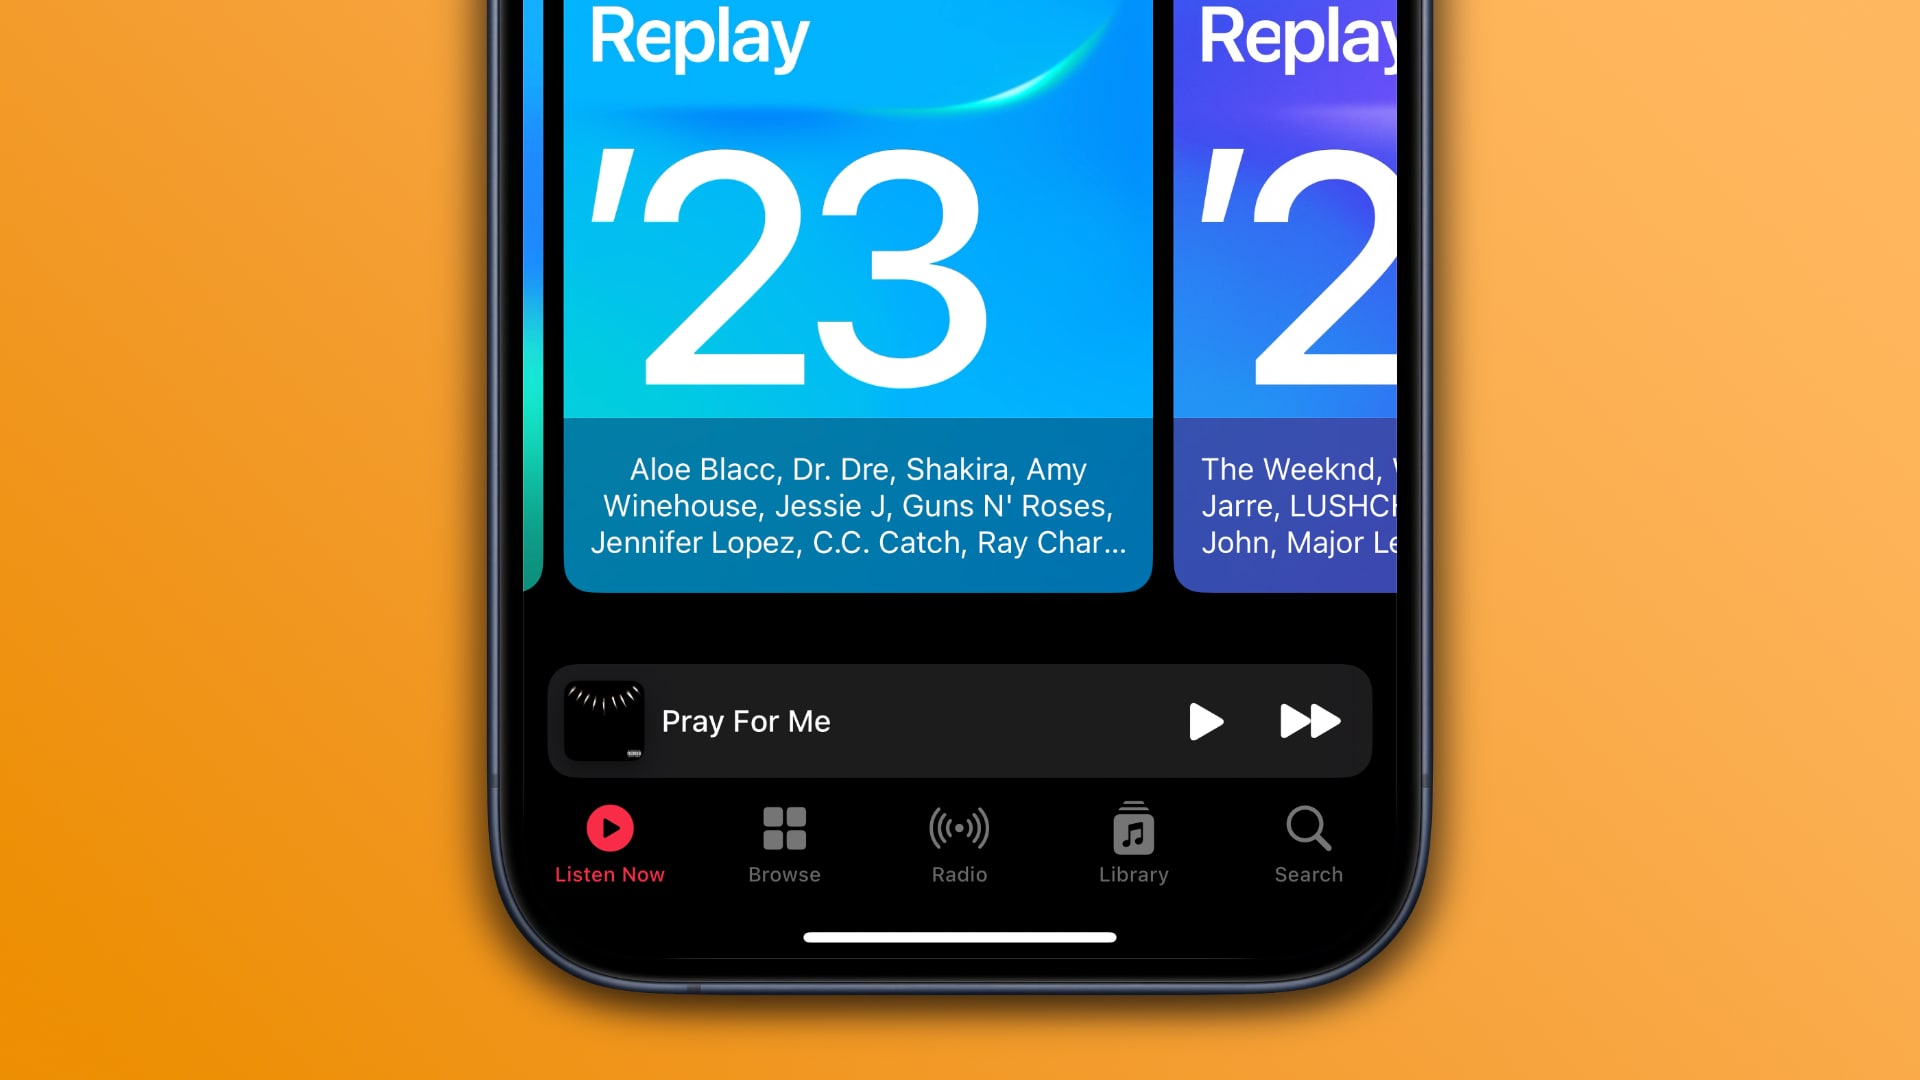 The Replay 2023 playlist in the iPhone's Music app